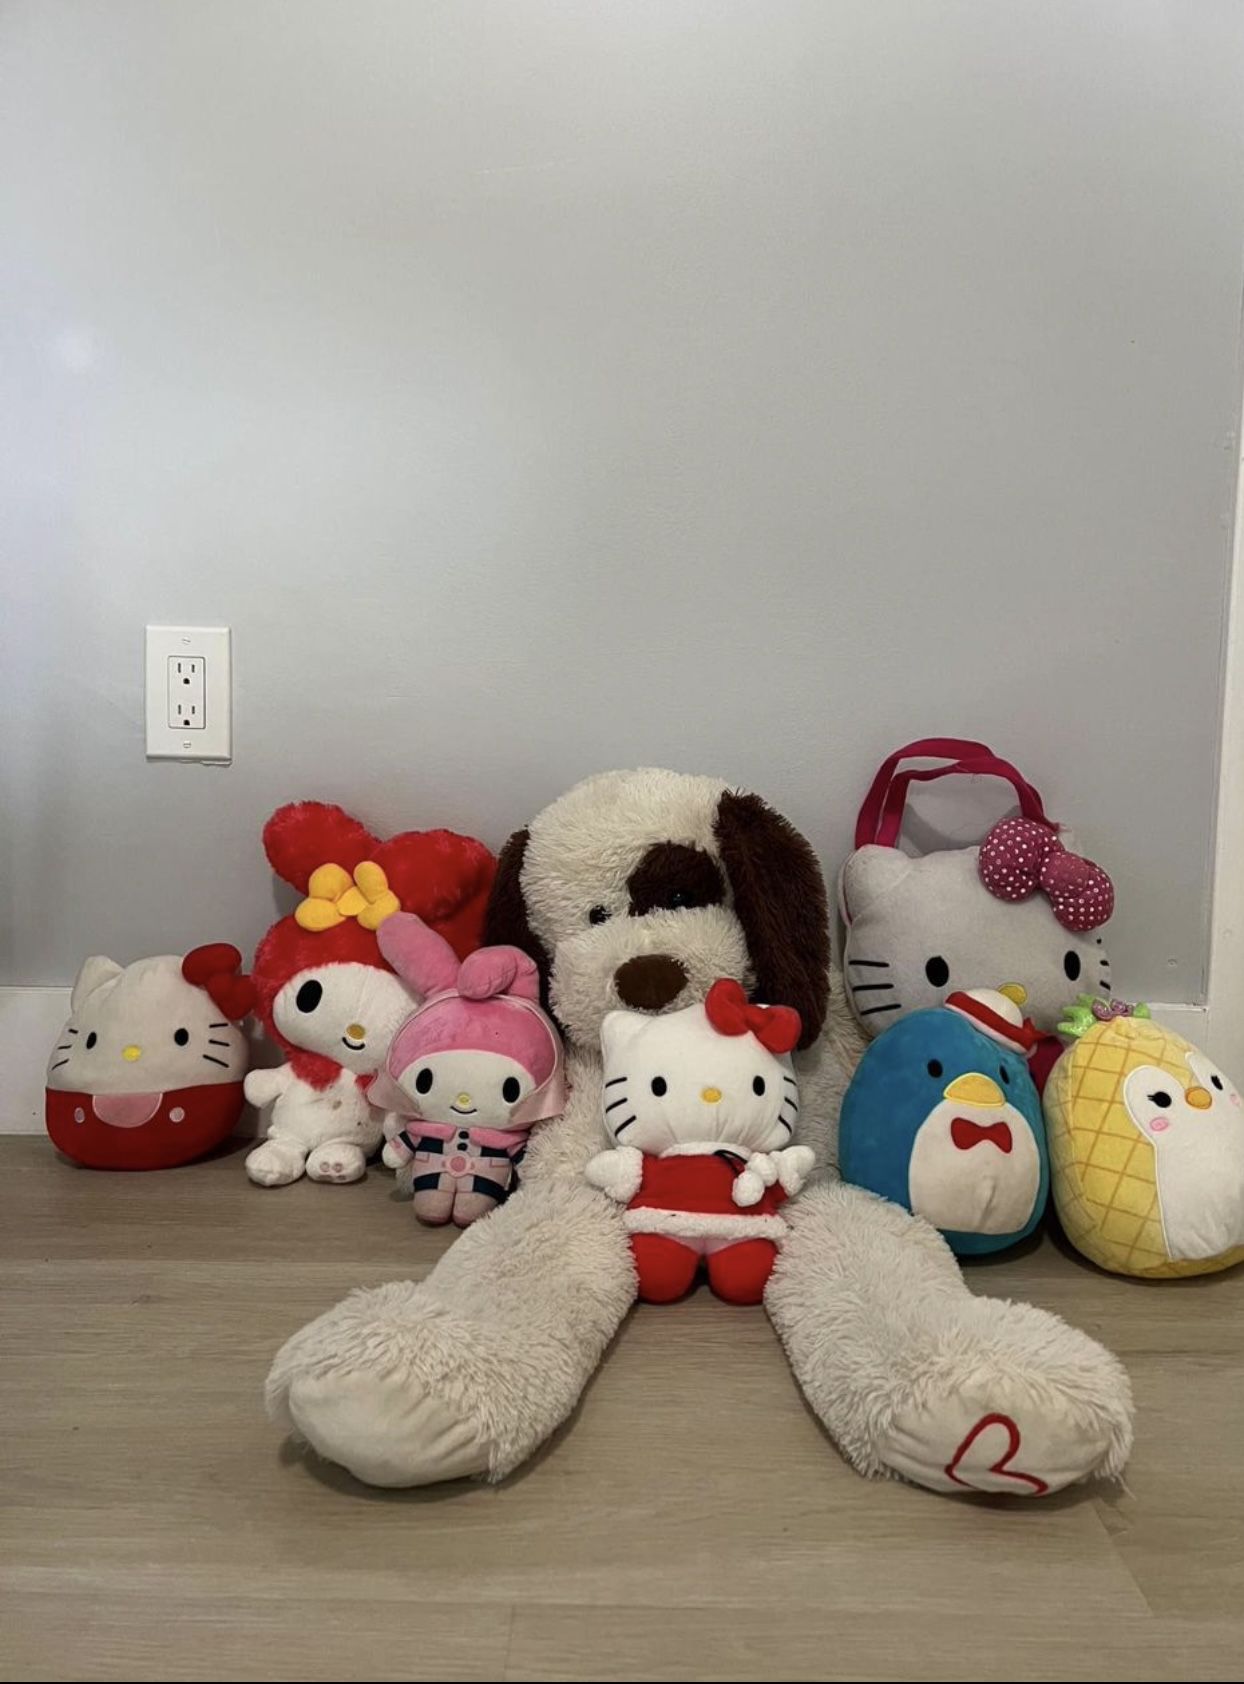 Hello Kitty Plushies and Keychains